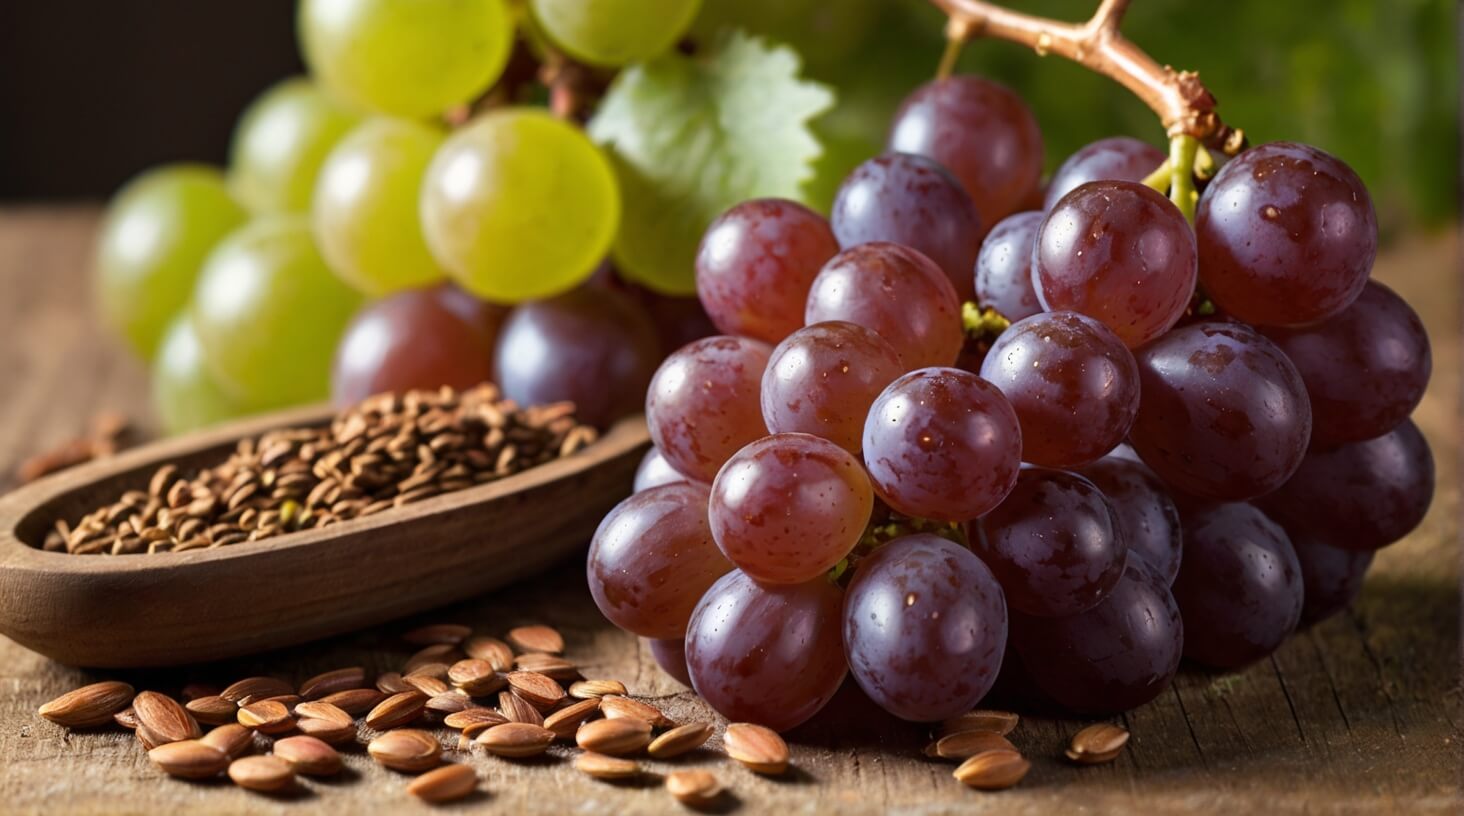  close-up image of a hand holding a bottle of grape seed extract capsules with a background of fresh grapes and green leaves, illustrating the process of taking grape seed extract for health benefits.